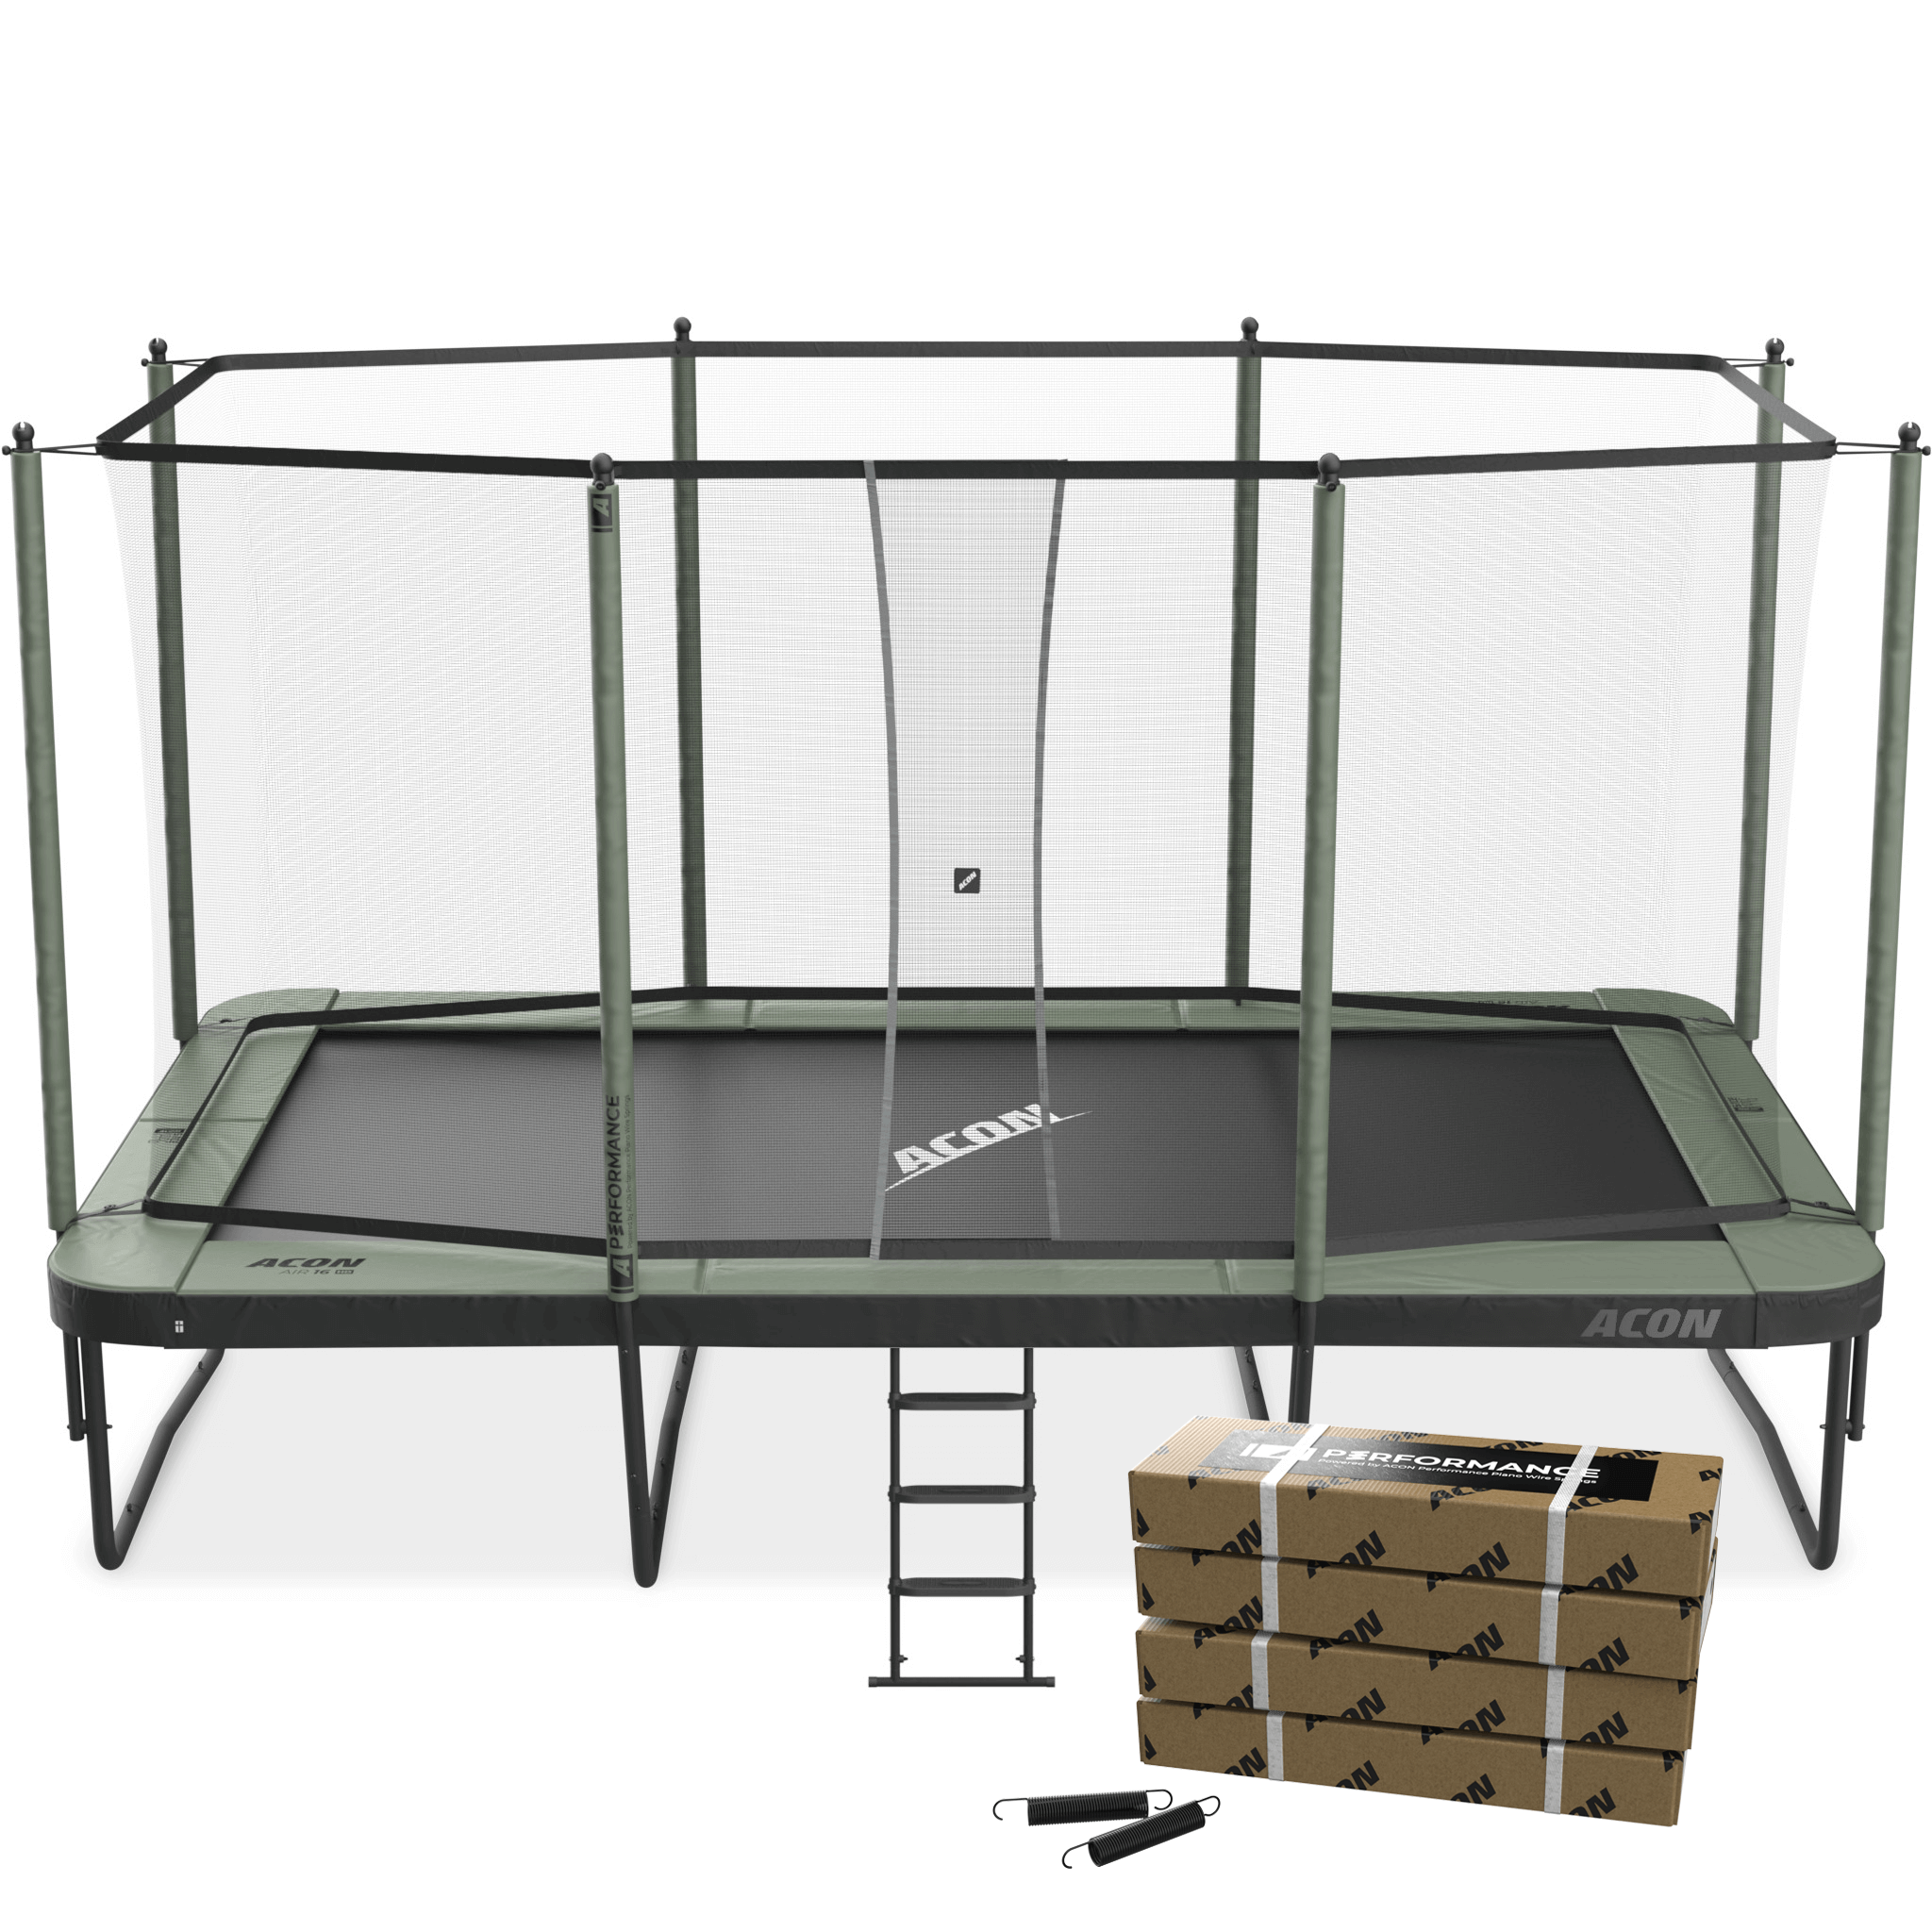 ACON Air 16 Sport HD Performance Rectangular Trampoline with Net and Ladder - image 1 of 6